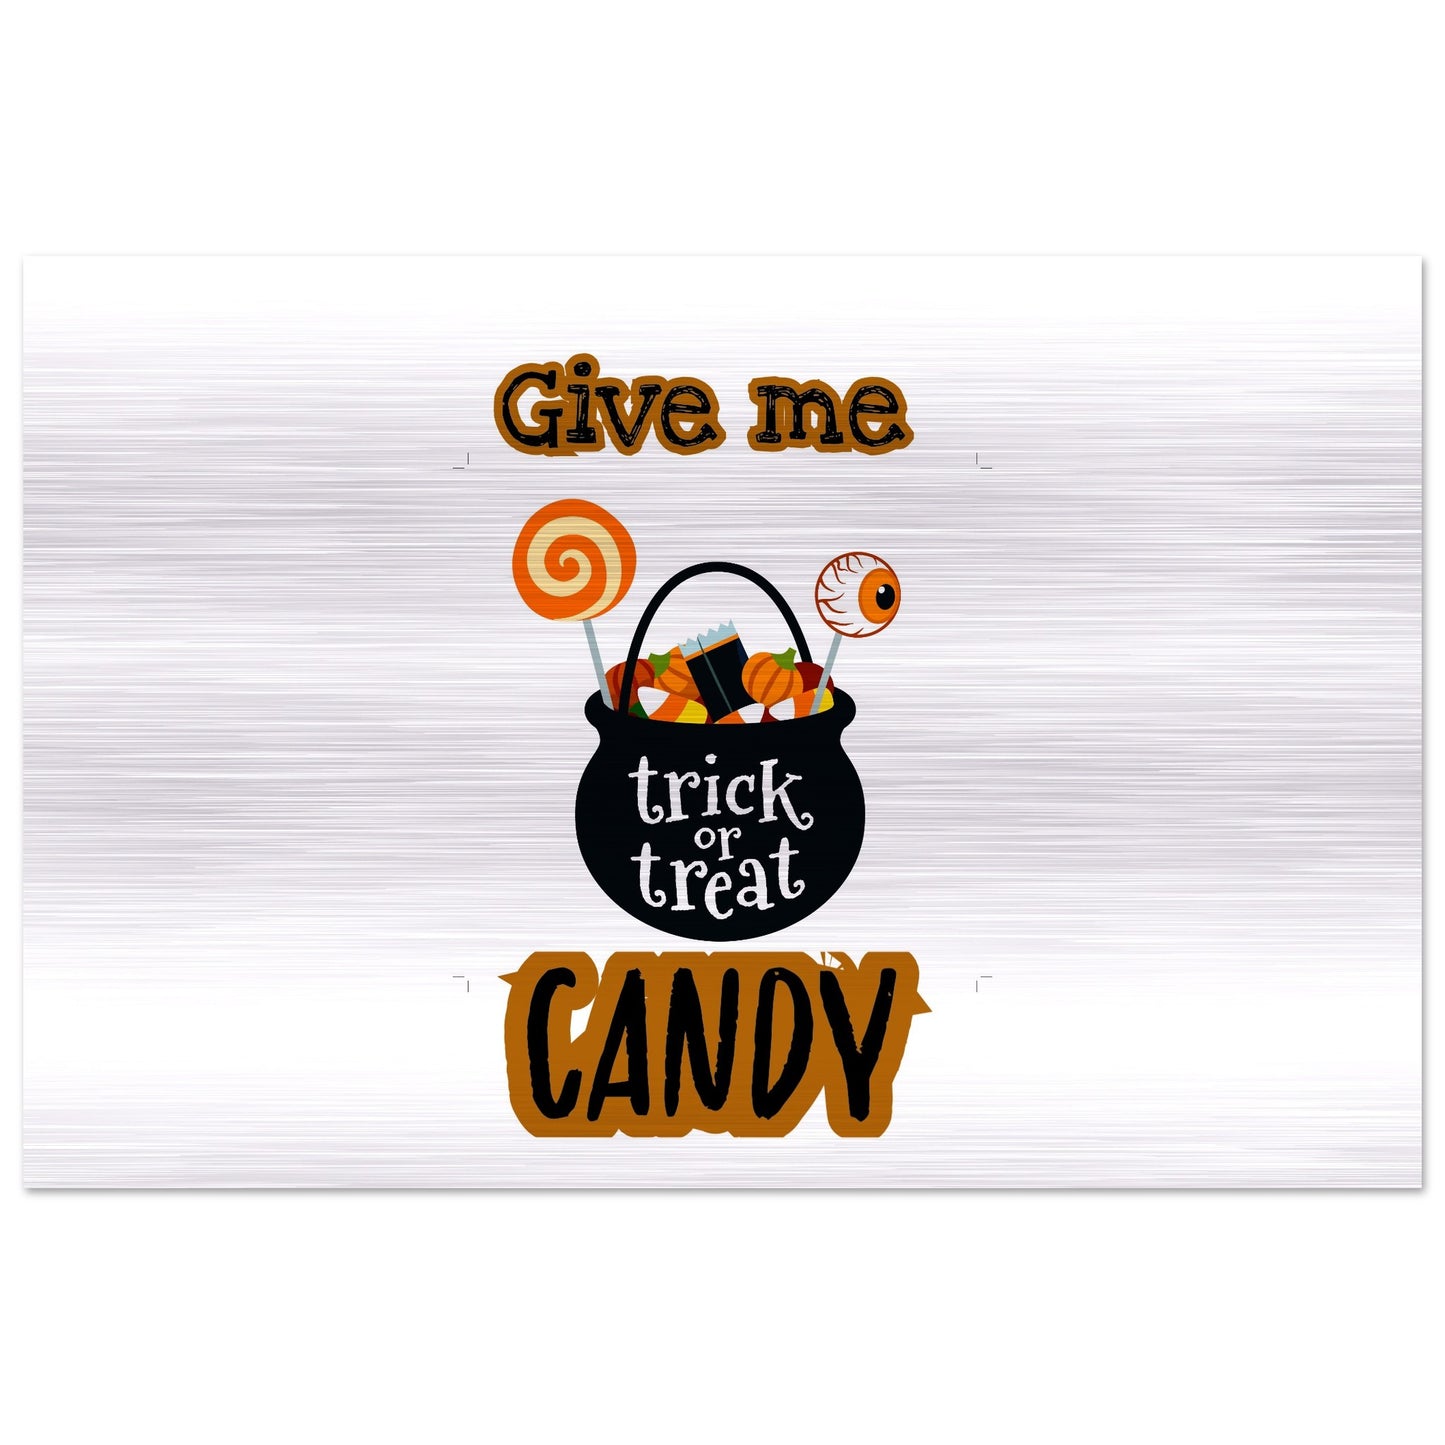 Give me candy -Brushed Aluminum Print